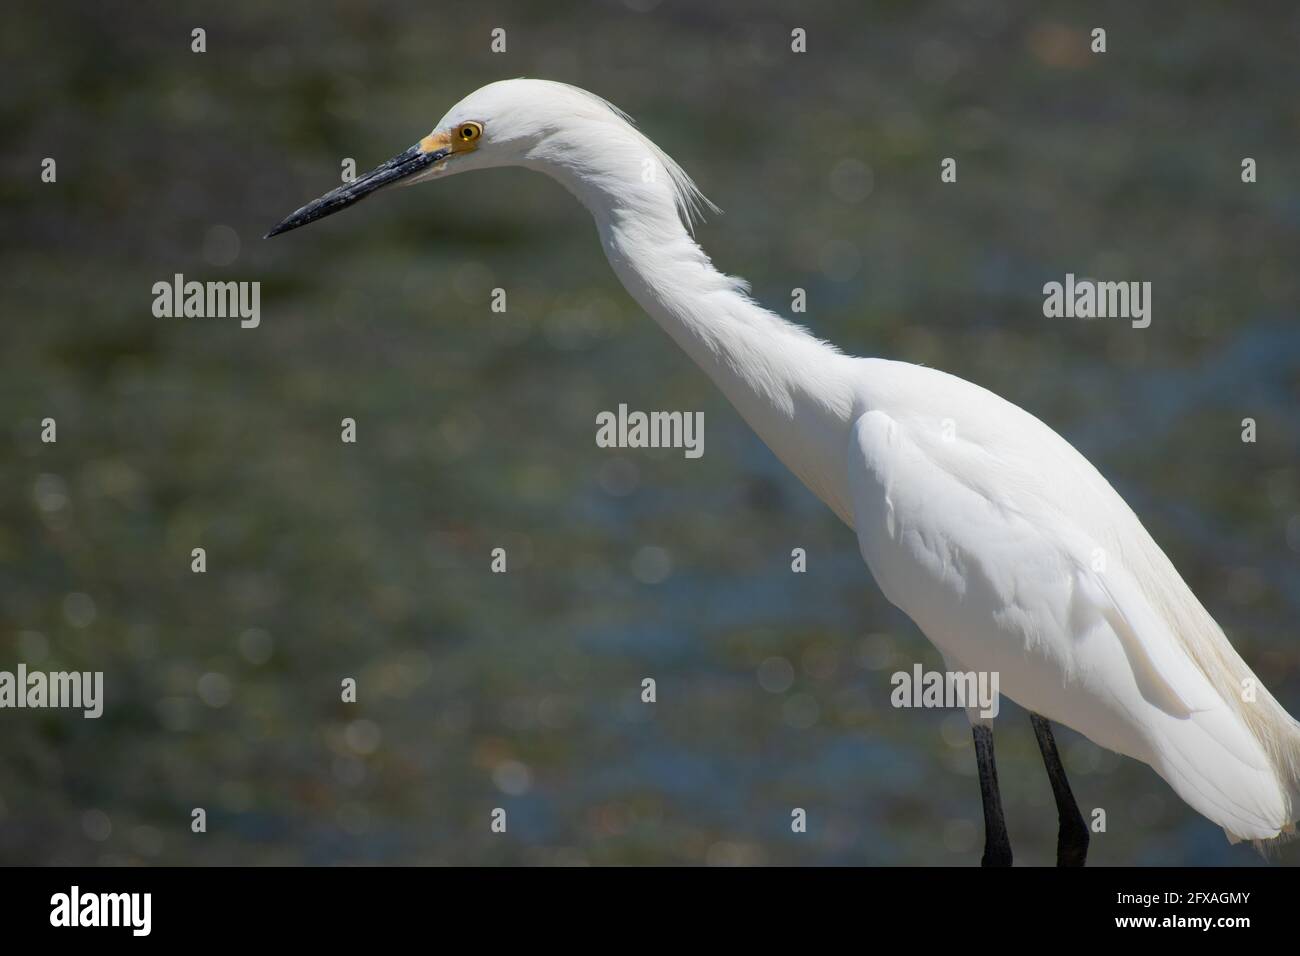 A photo of a Snowy Egrets standing on the water's edge in downtown St. Pete in Florida. Stock Photo